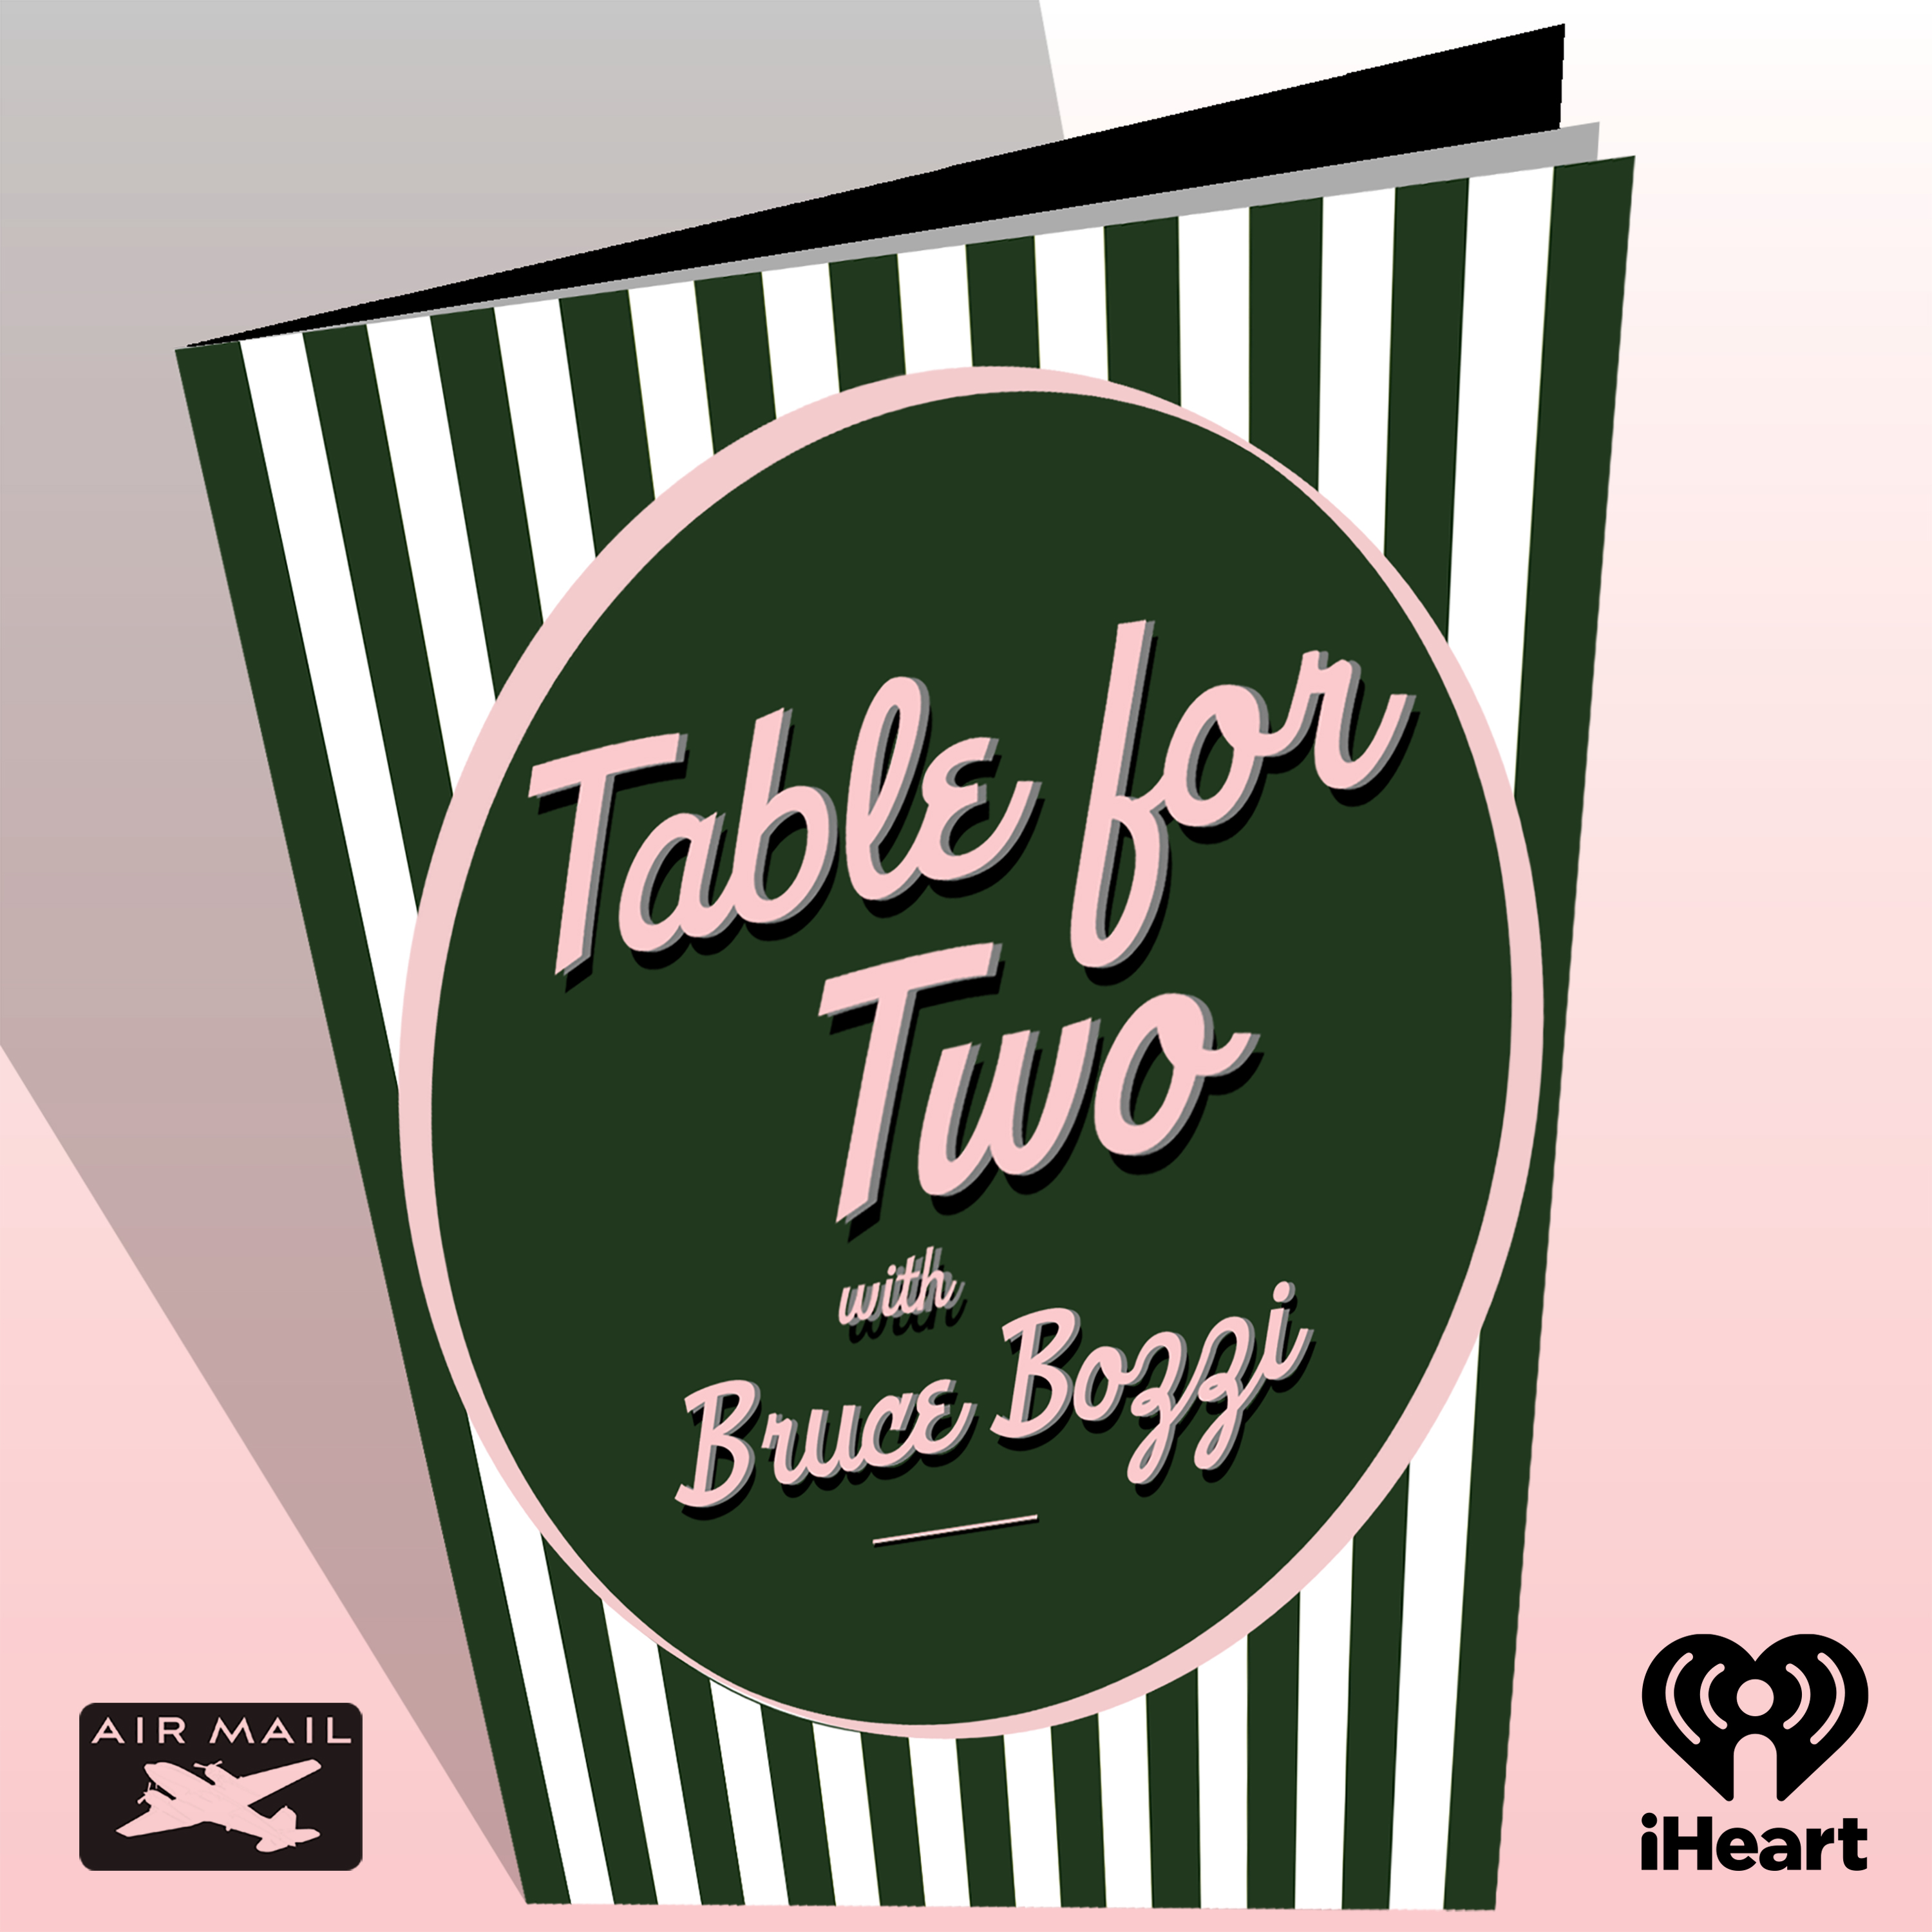 Introducing: Table for Two